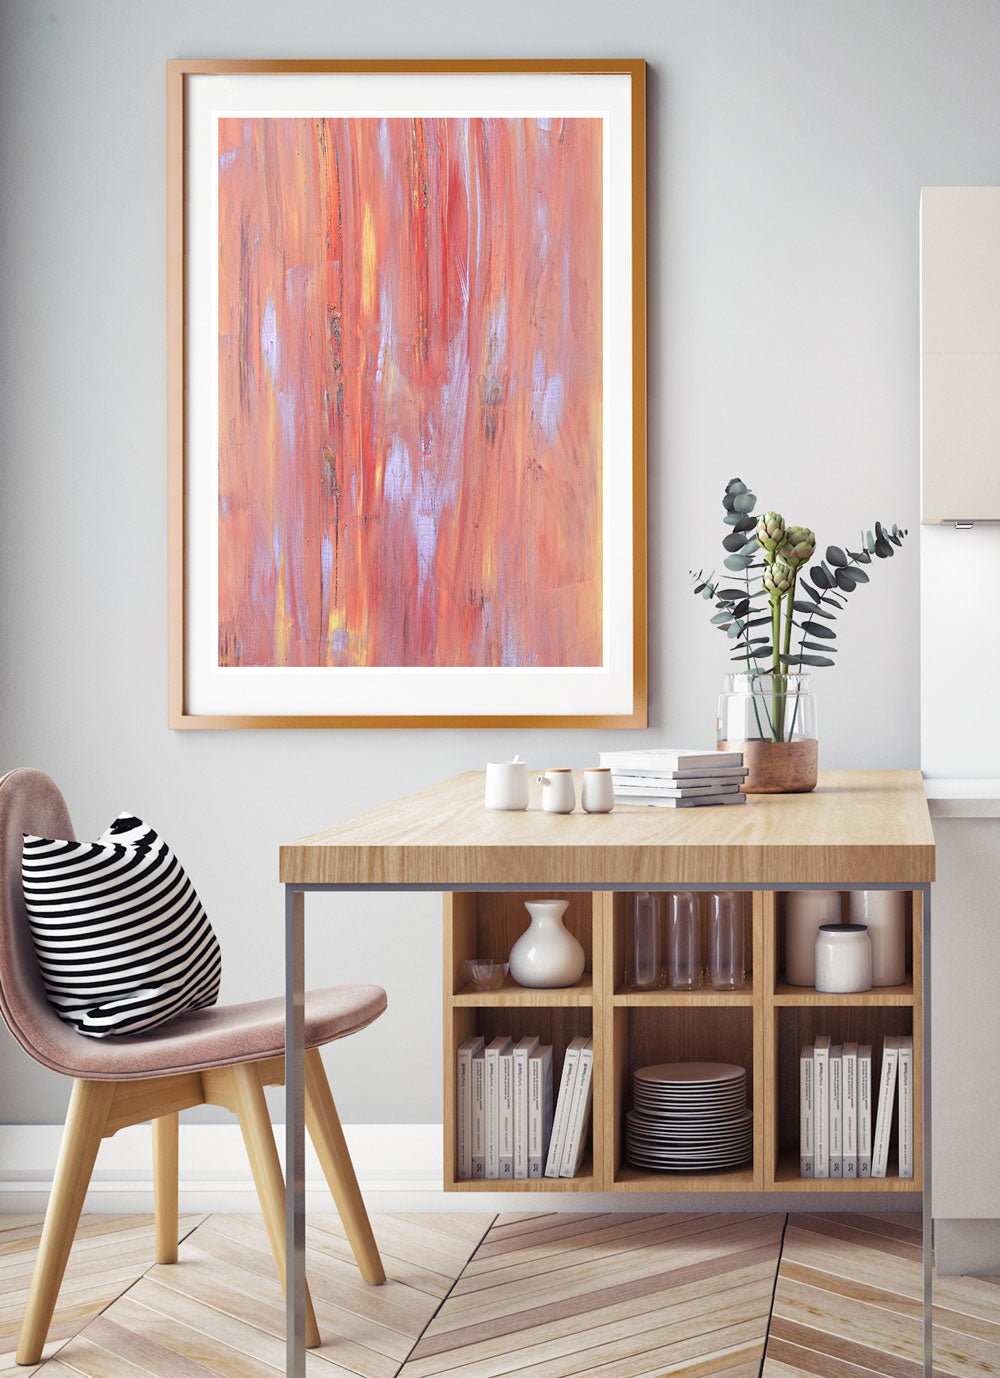 Fireworks Night Sky Art Print in a stunning dining area